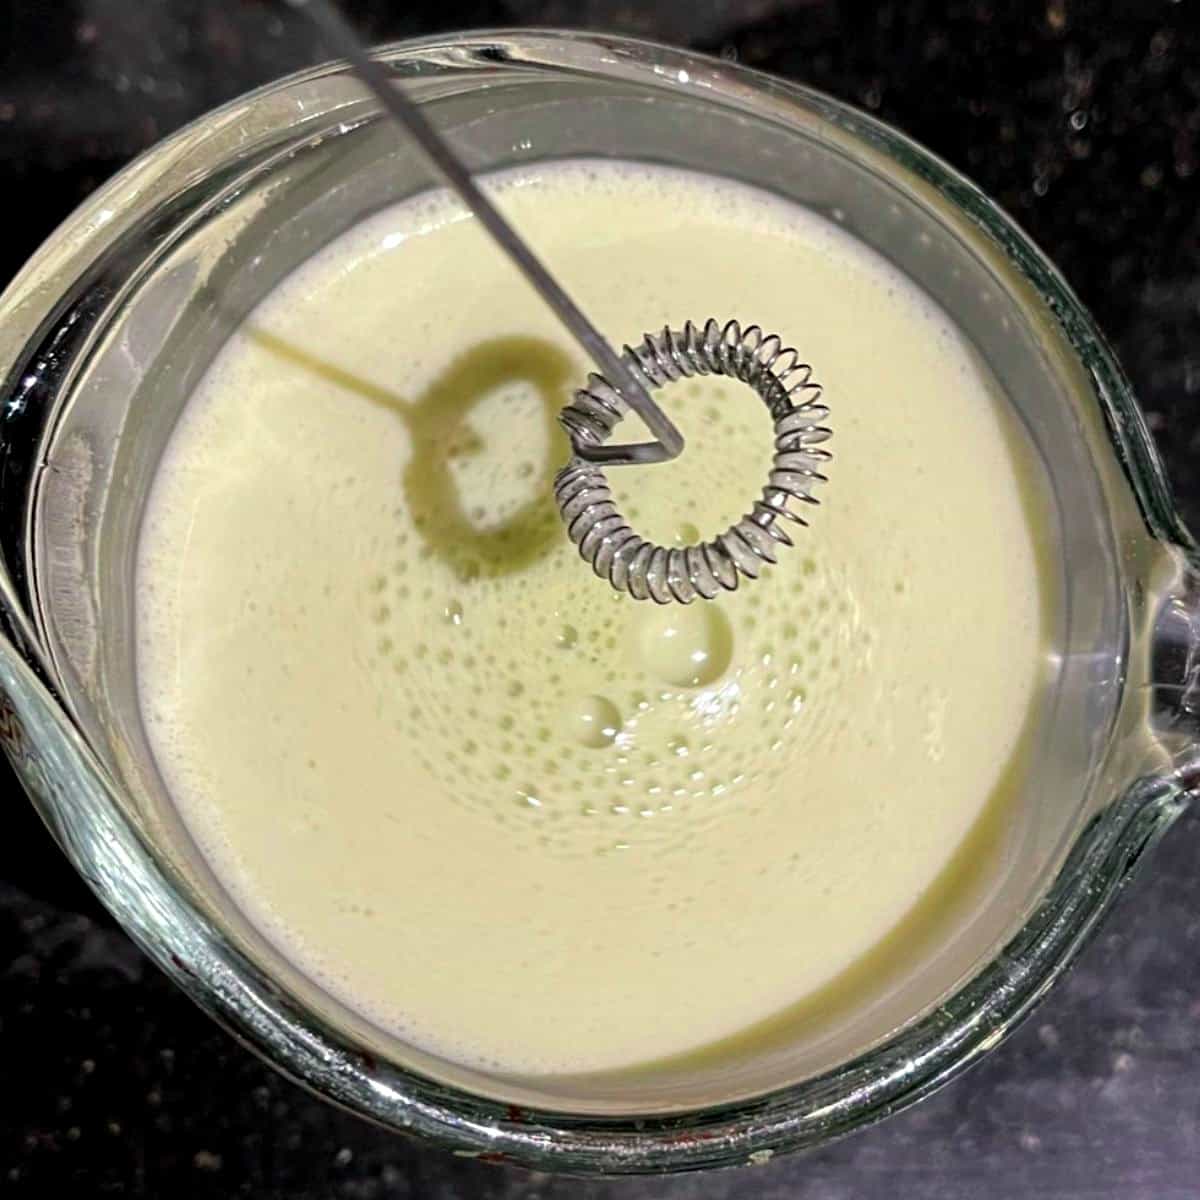 Matcha tea whisked with milk using a milk frother.